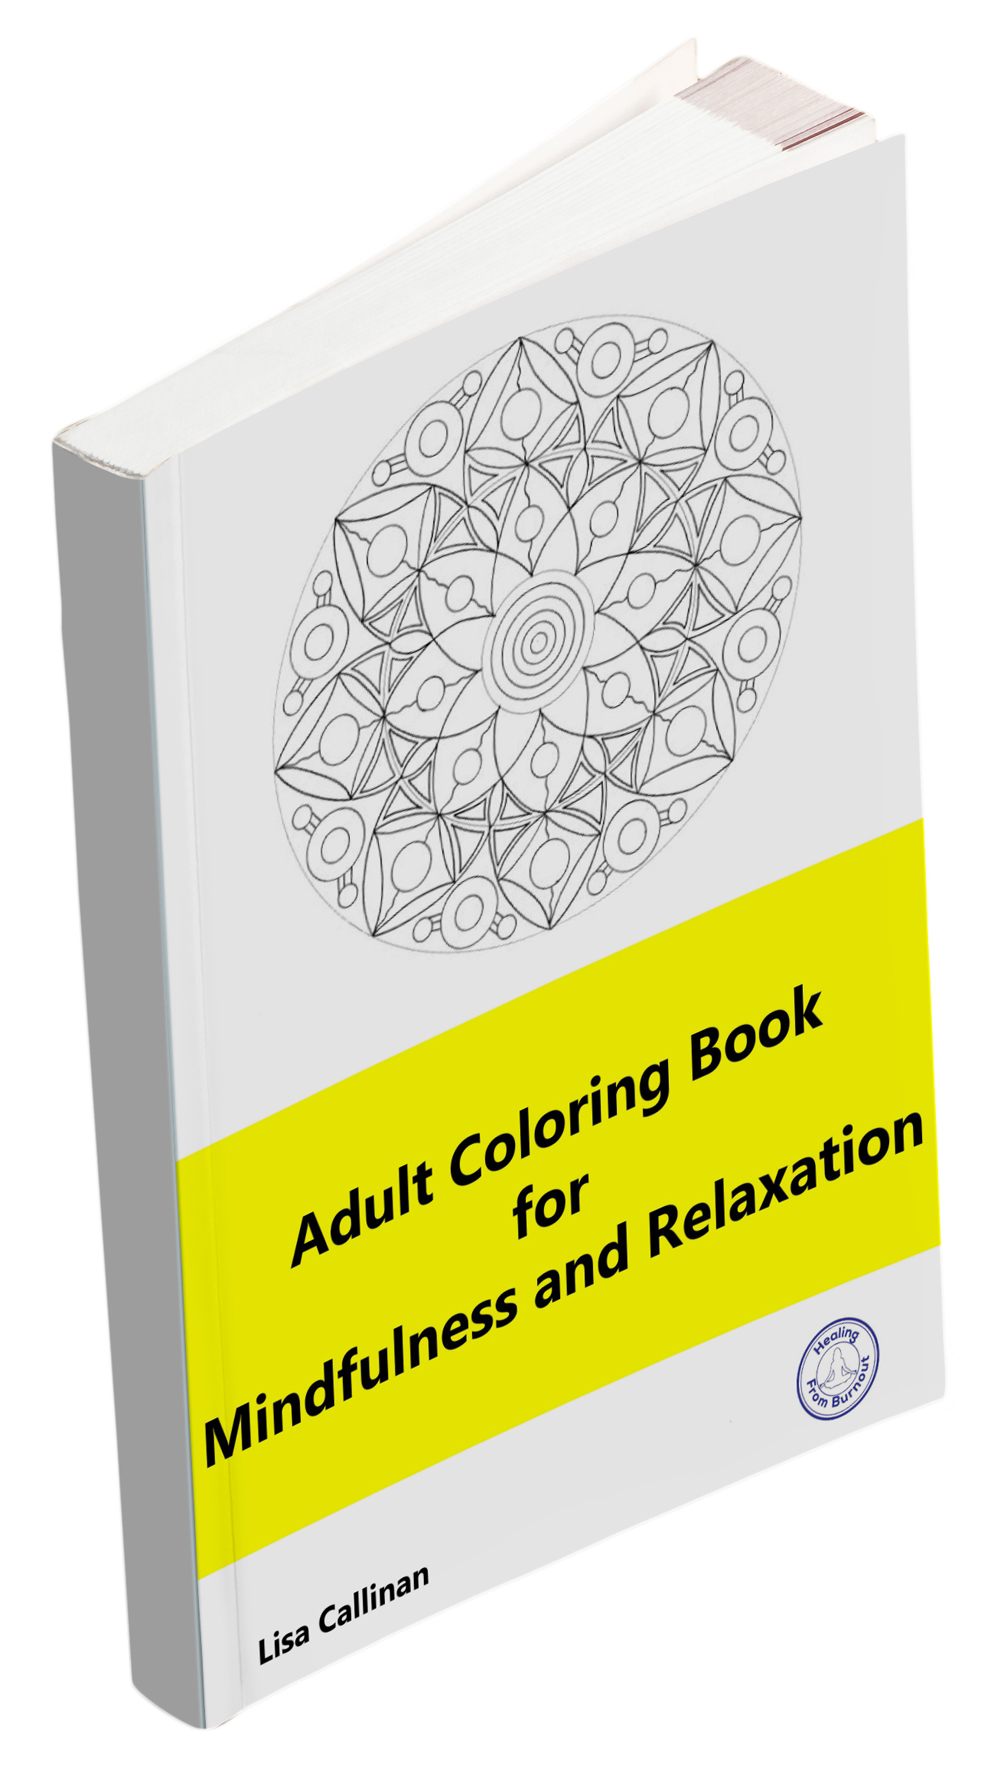 Adult Coloring Book for Mindfulnes and Relaxation. 